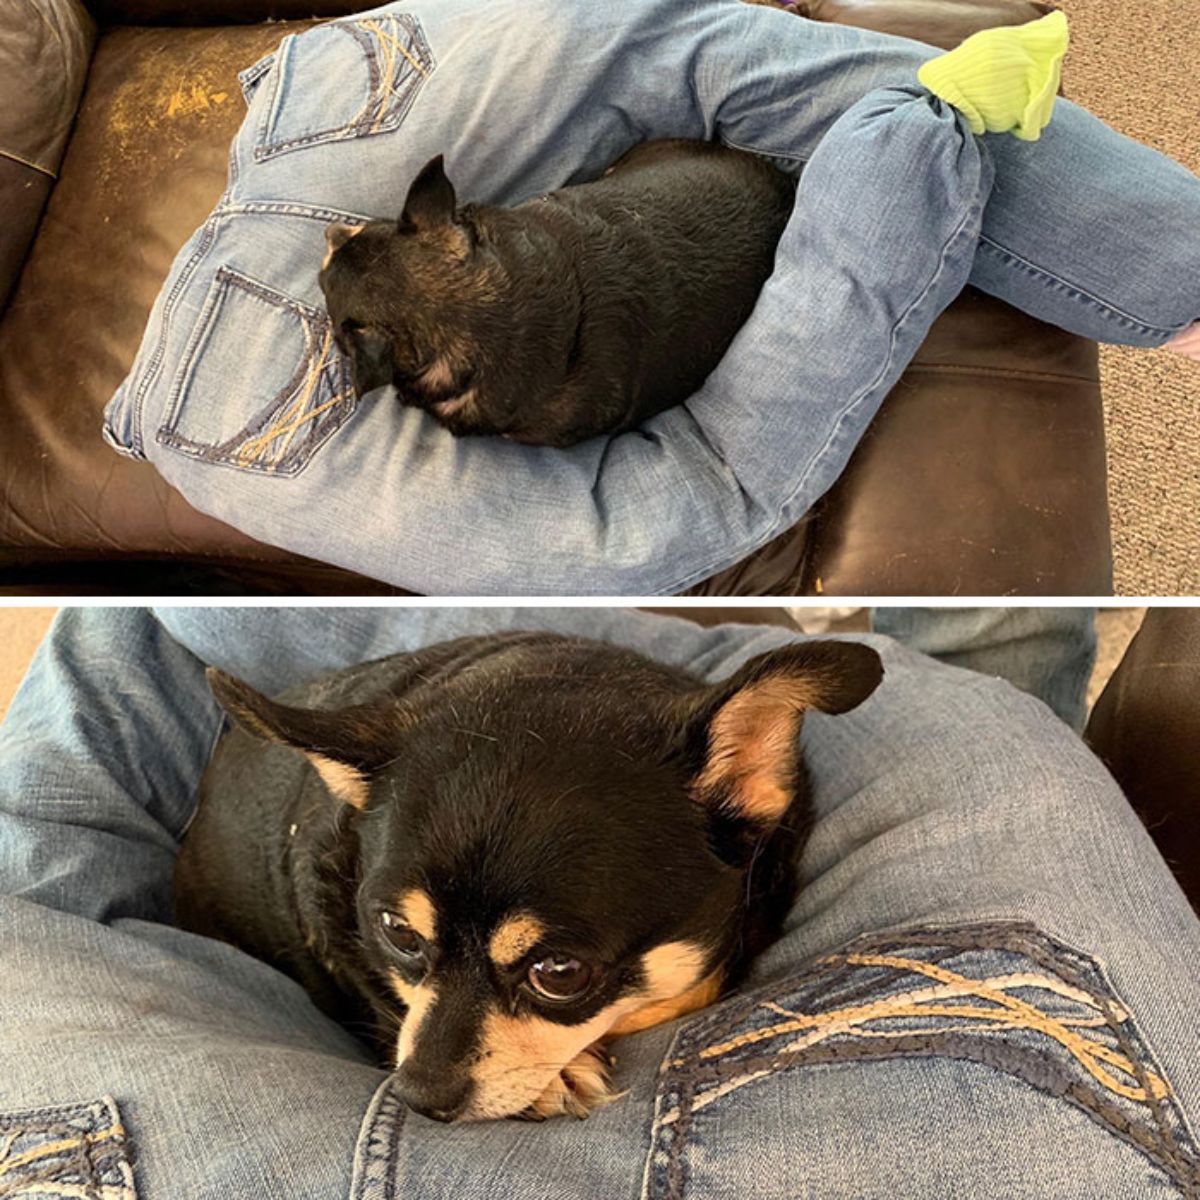 2 photos of an old black and brown chihuahua sleeping on a stuffed pair of blue jeans on a brown sofa